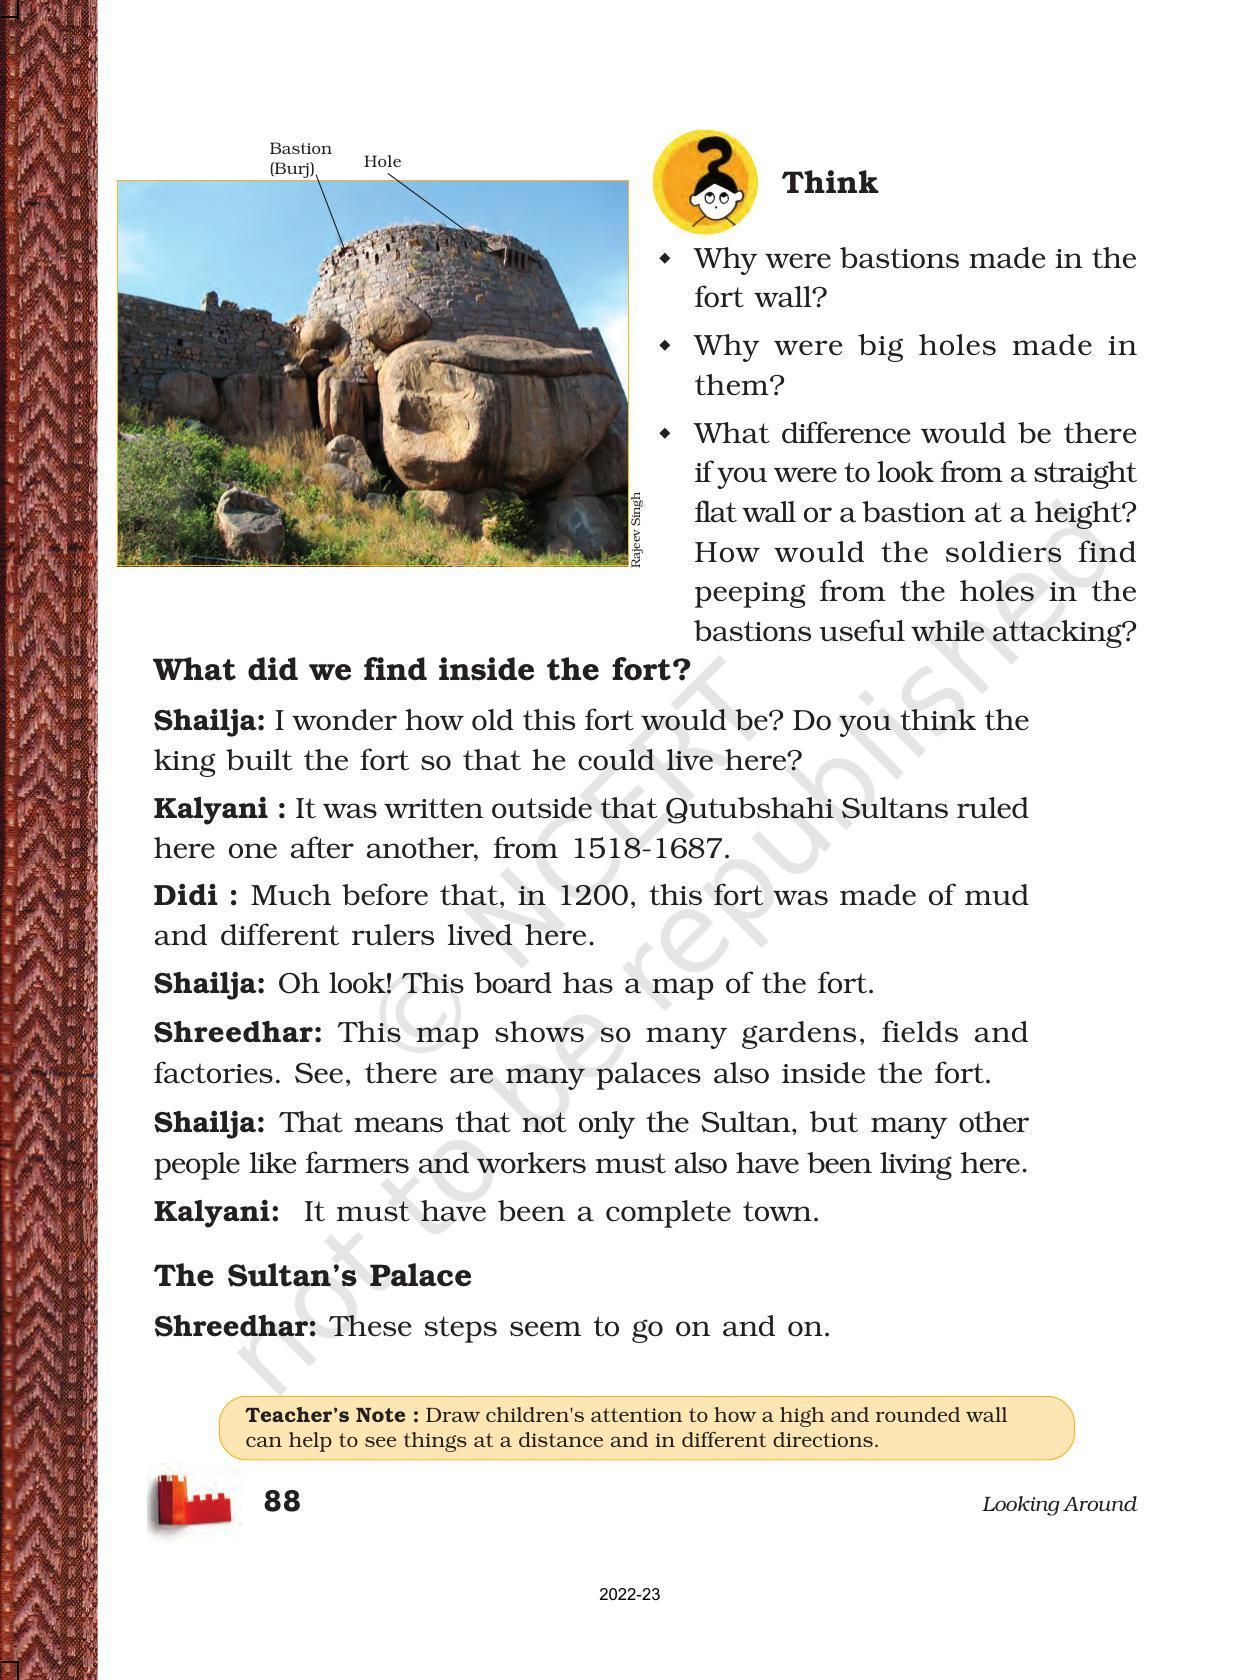 NCERT Book for Class 5 EVS Chapter 10 Walls Tell Stories - Page 2